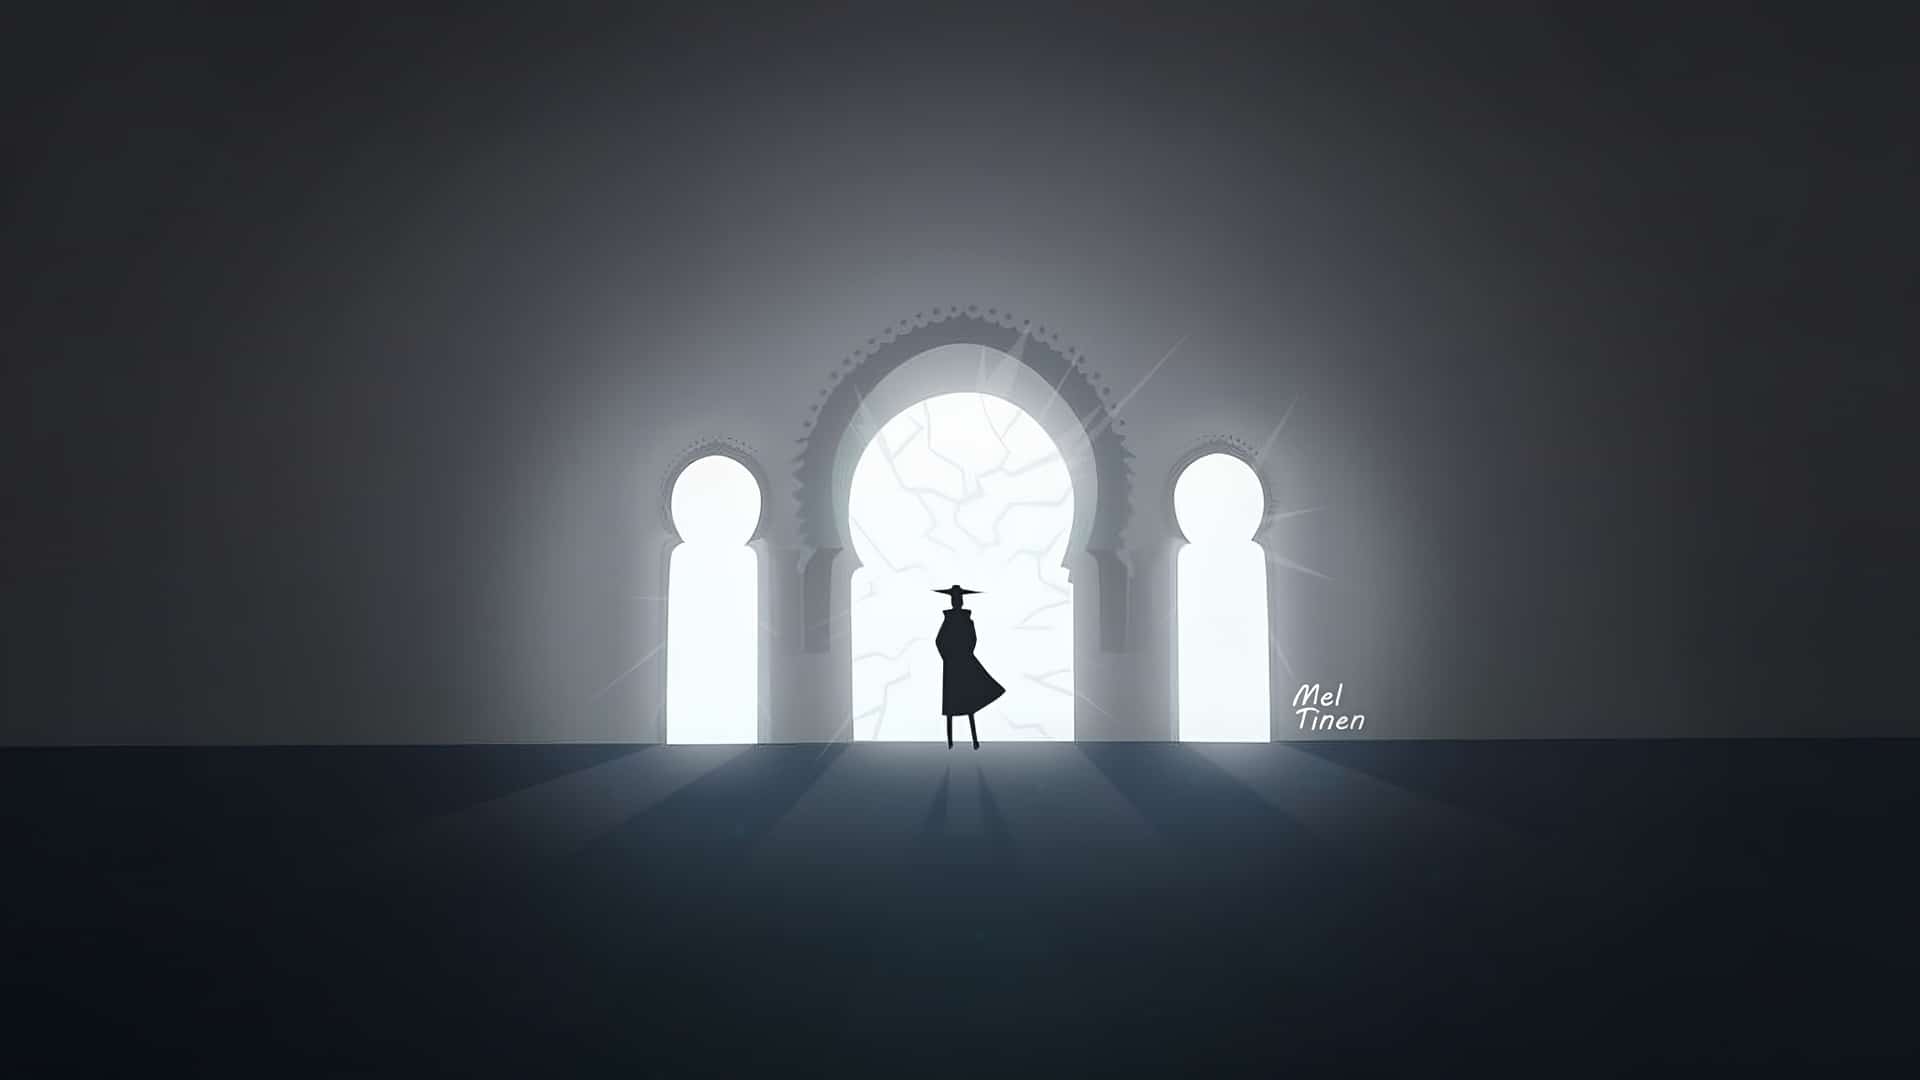 Image by Meleusou – Valorant wallpaper of Cypher's silhouette standing over a broken entrance.